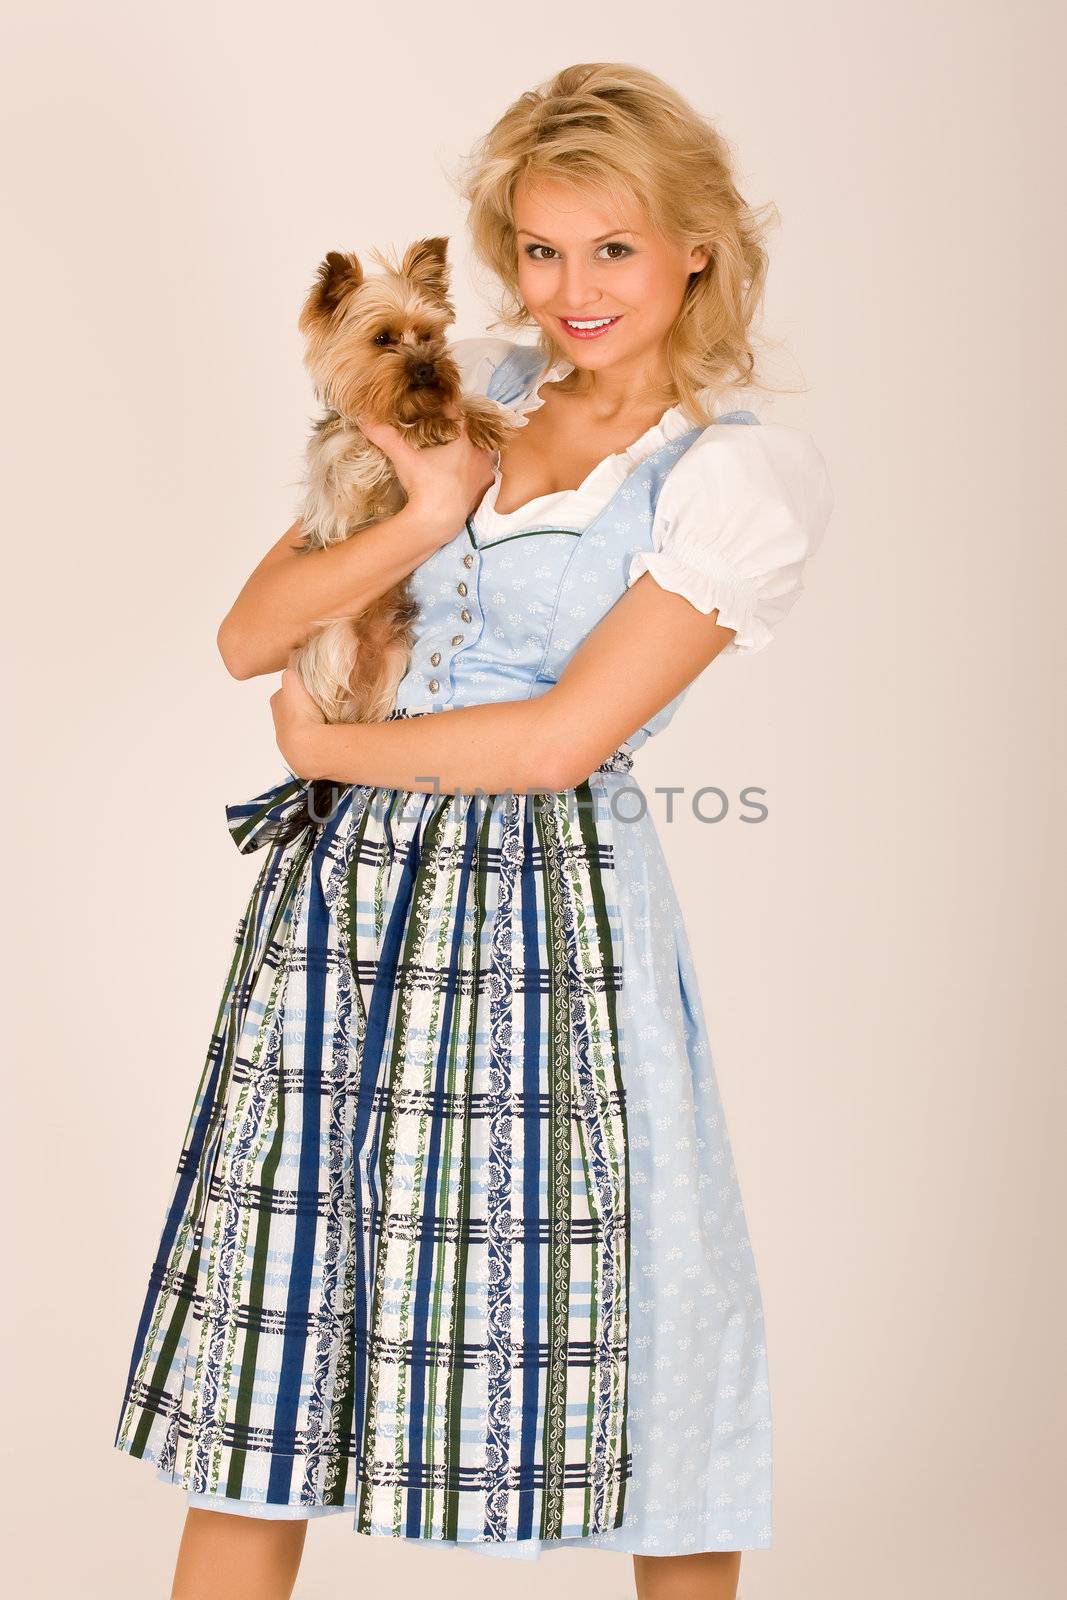 Bavarian girl with dog by STphotography